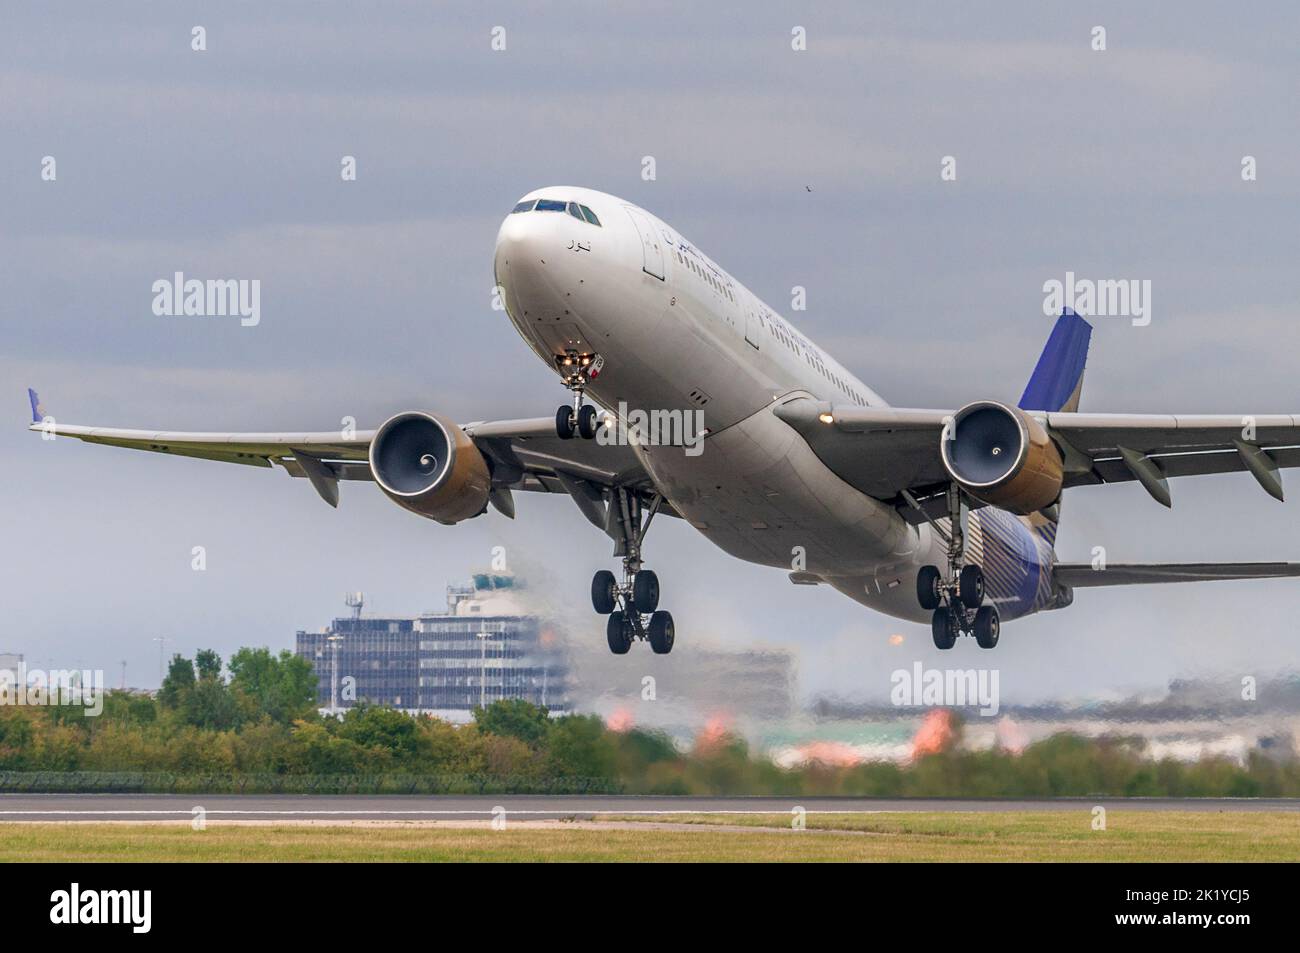 Jordan Aviation Airbus A330-203 regustratuin JY-JVB takes off at Manchester airport. Stock Photo